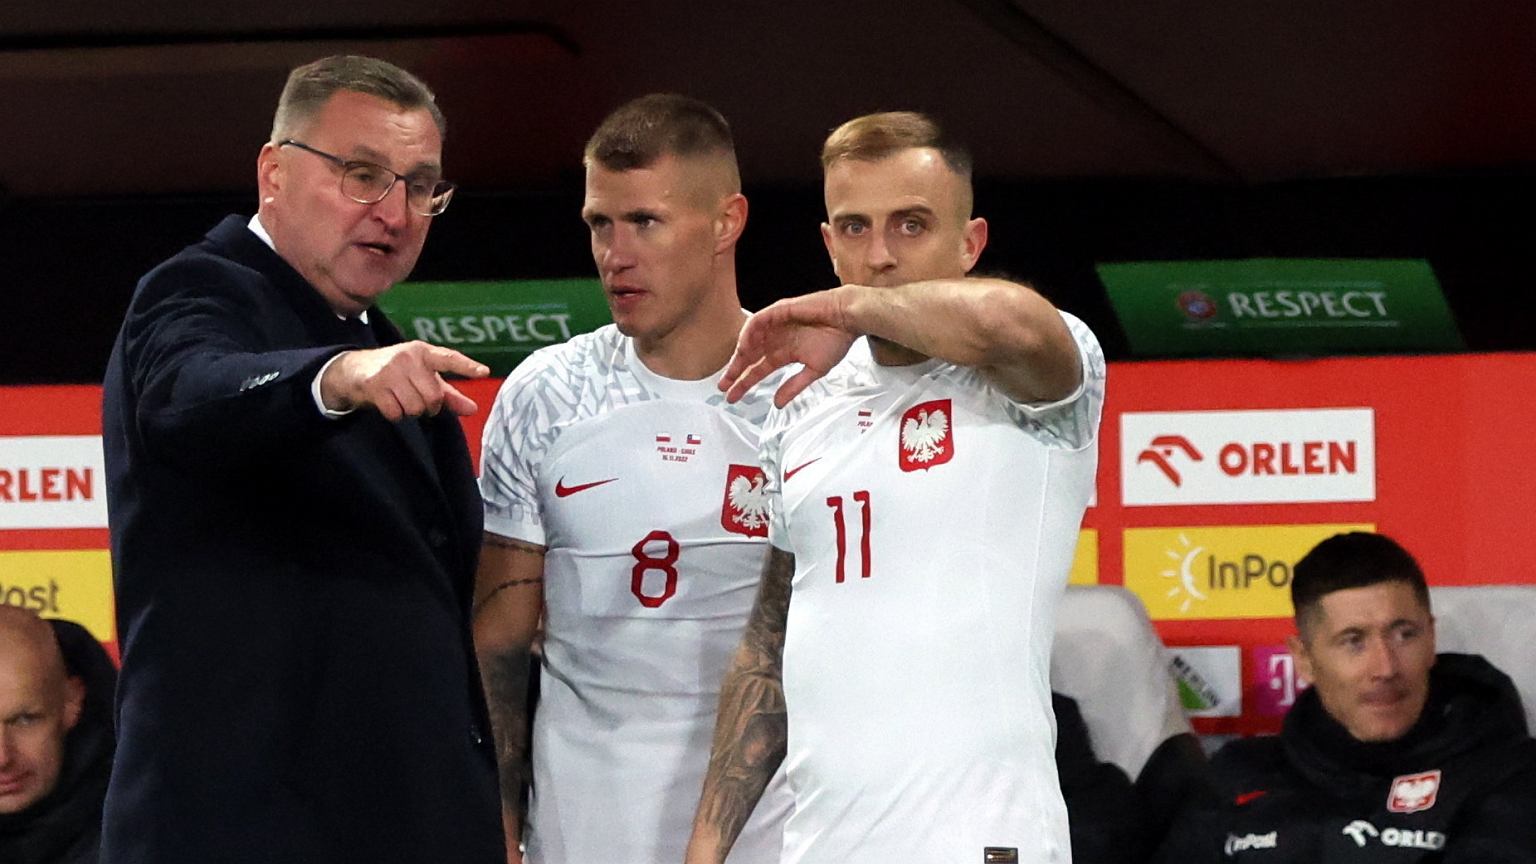 Grosicki Michniewicz's agent hit.  "He always thinks he's right" Polish national team